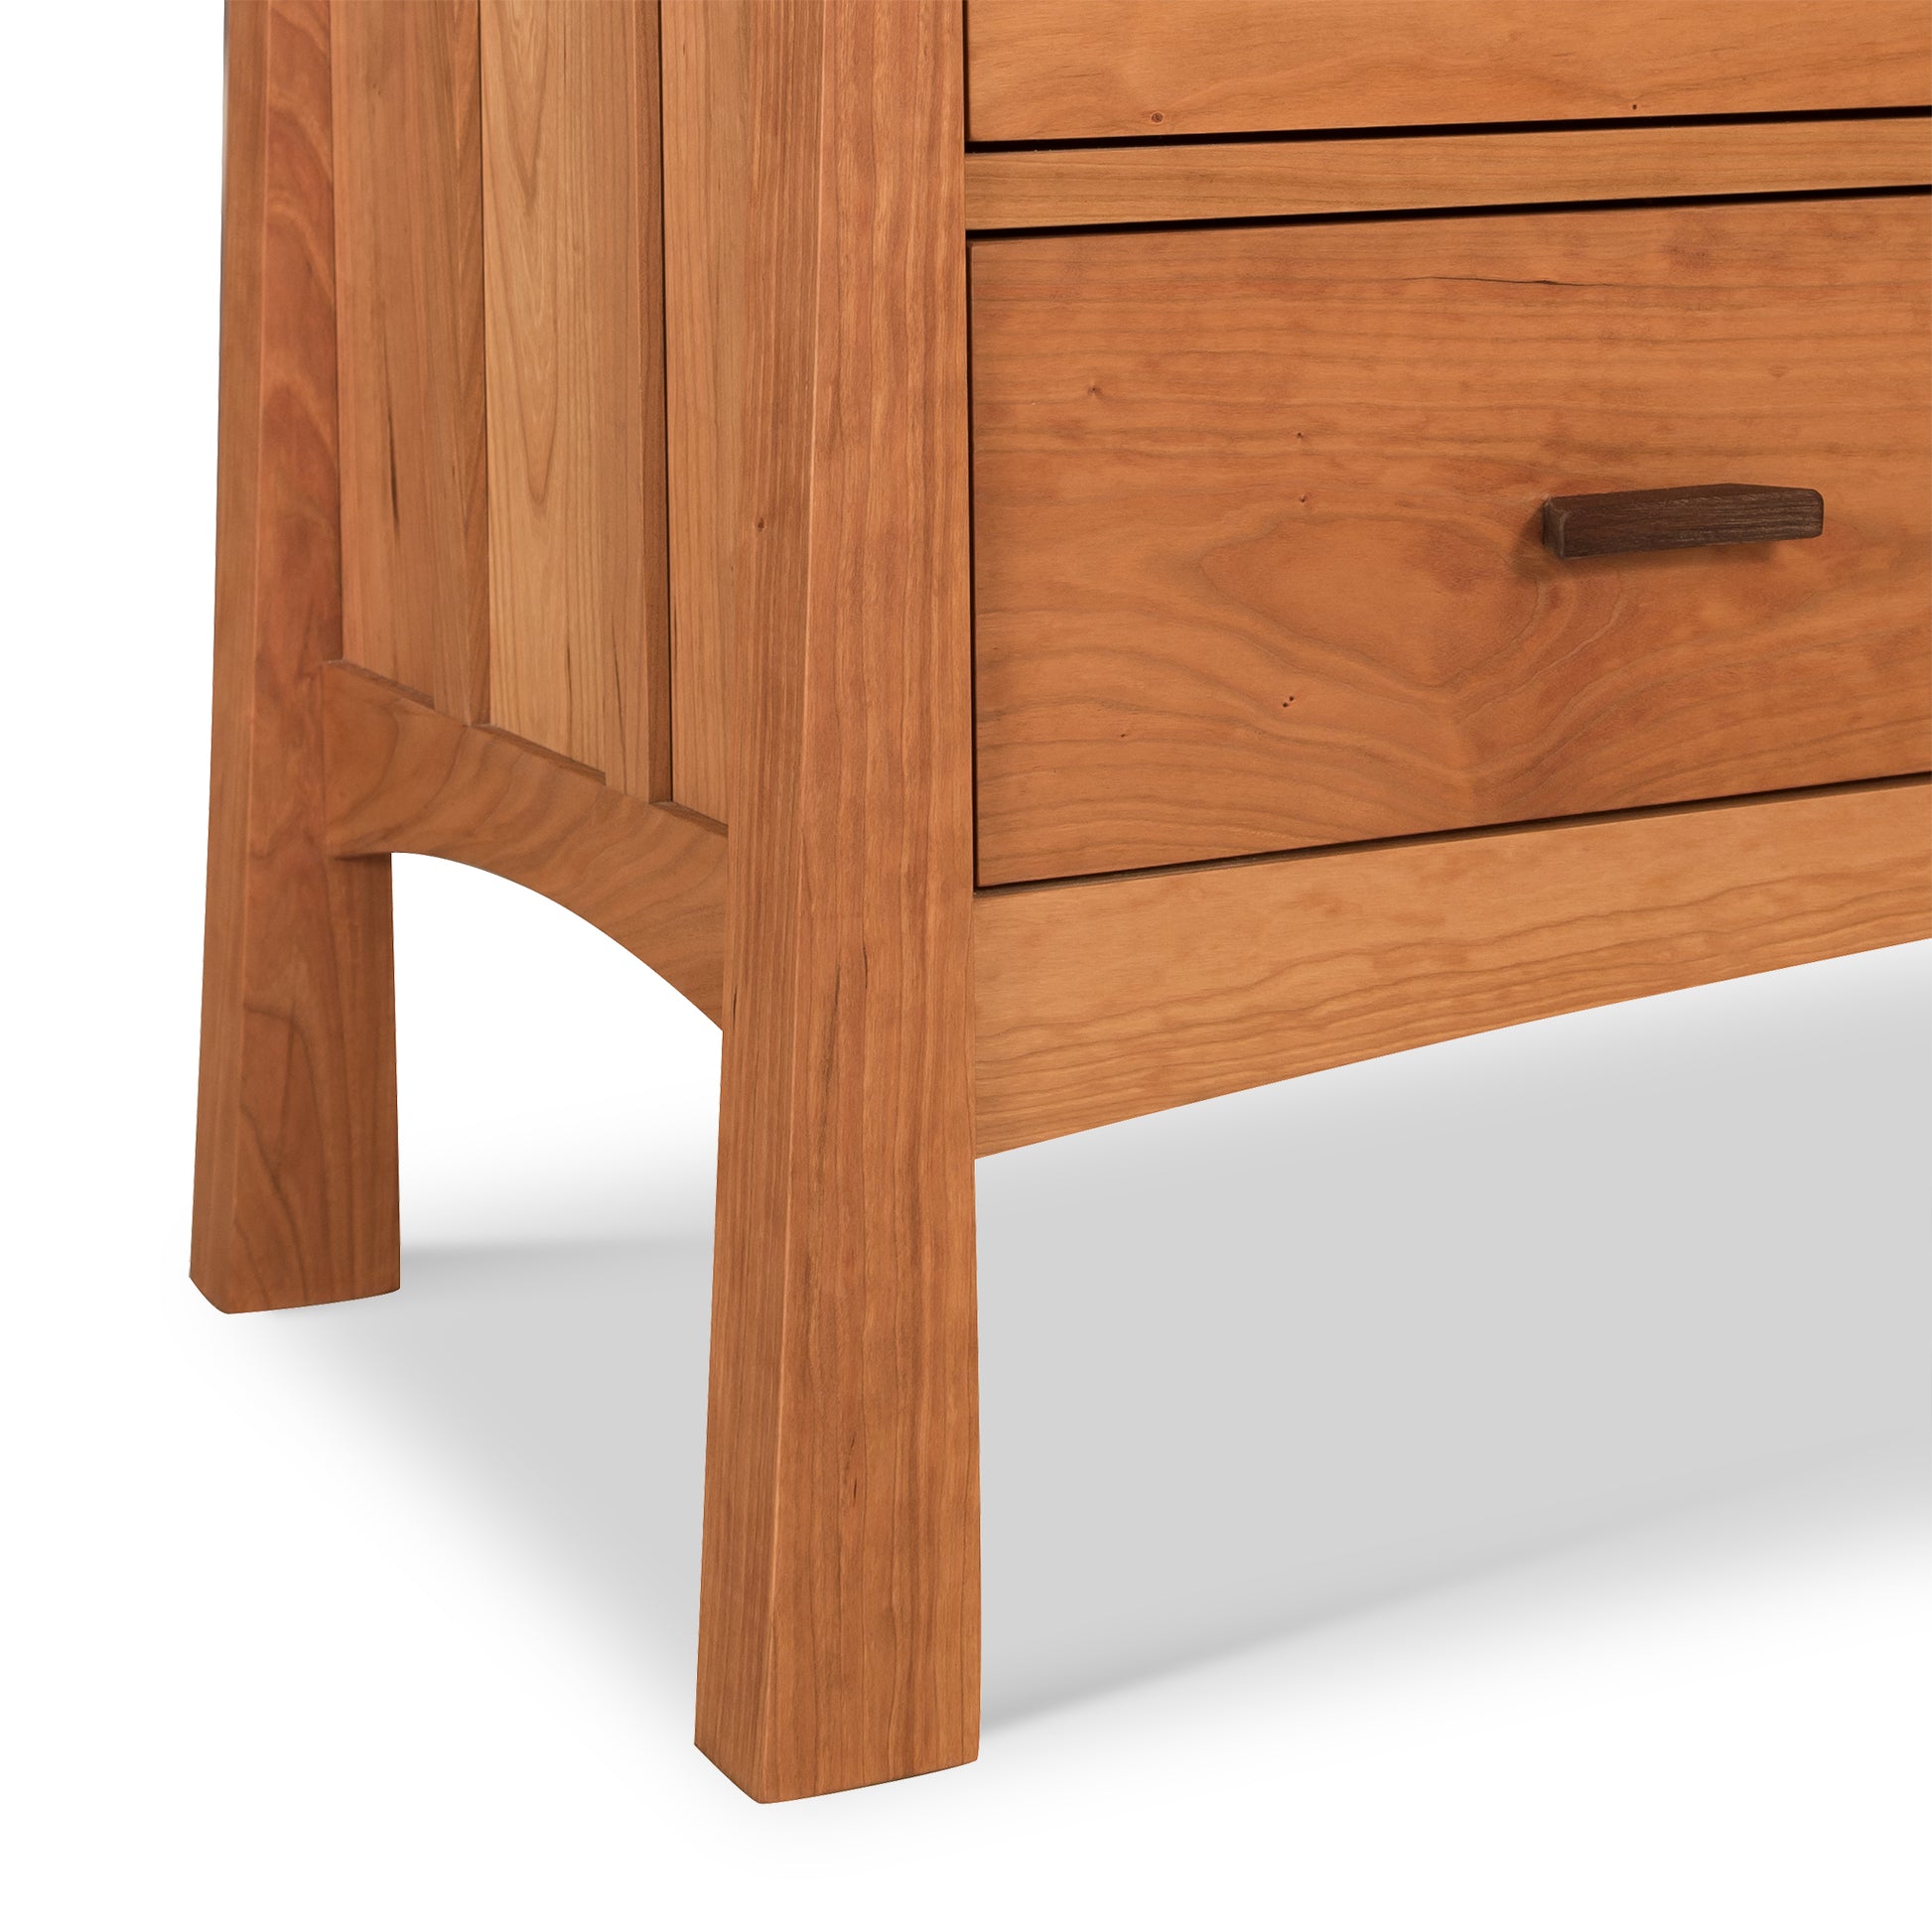 Close-up of a Vermont Furniture Designs Contemporary Craftsman 7-Drawer Chest, showcasing its grain pattern and Arts and Crafts styling.